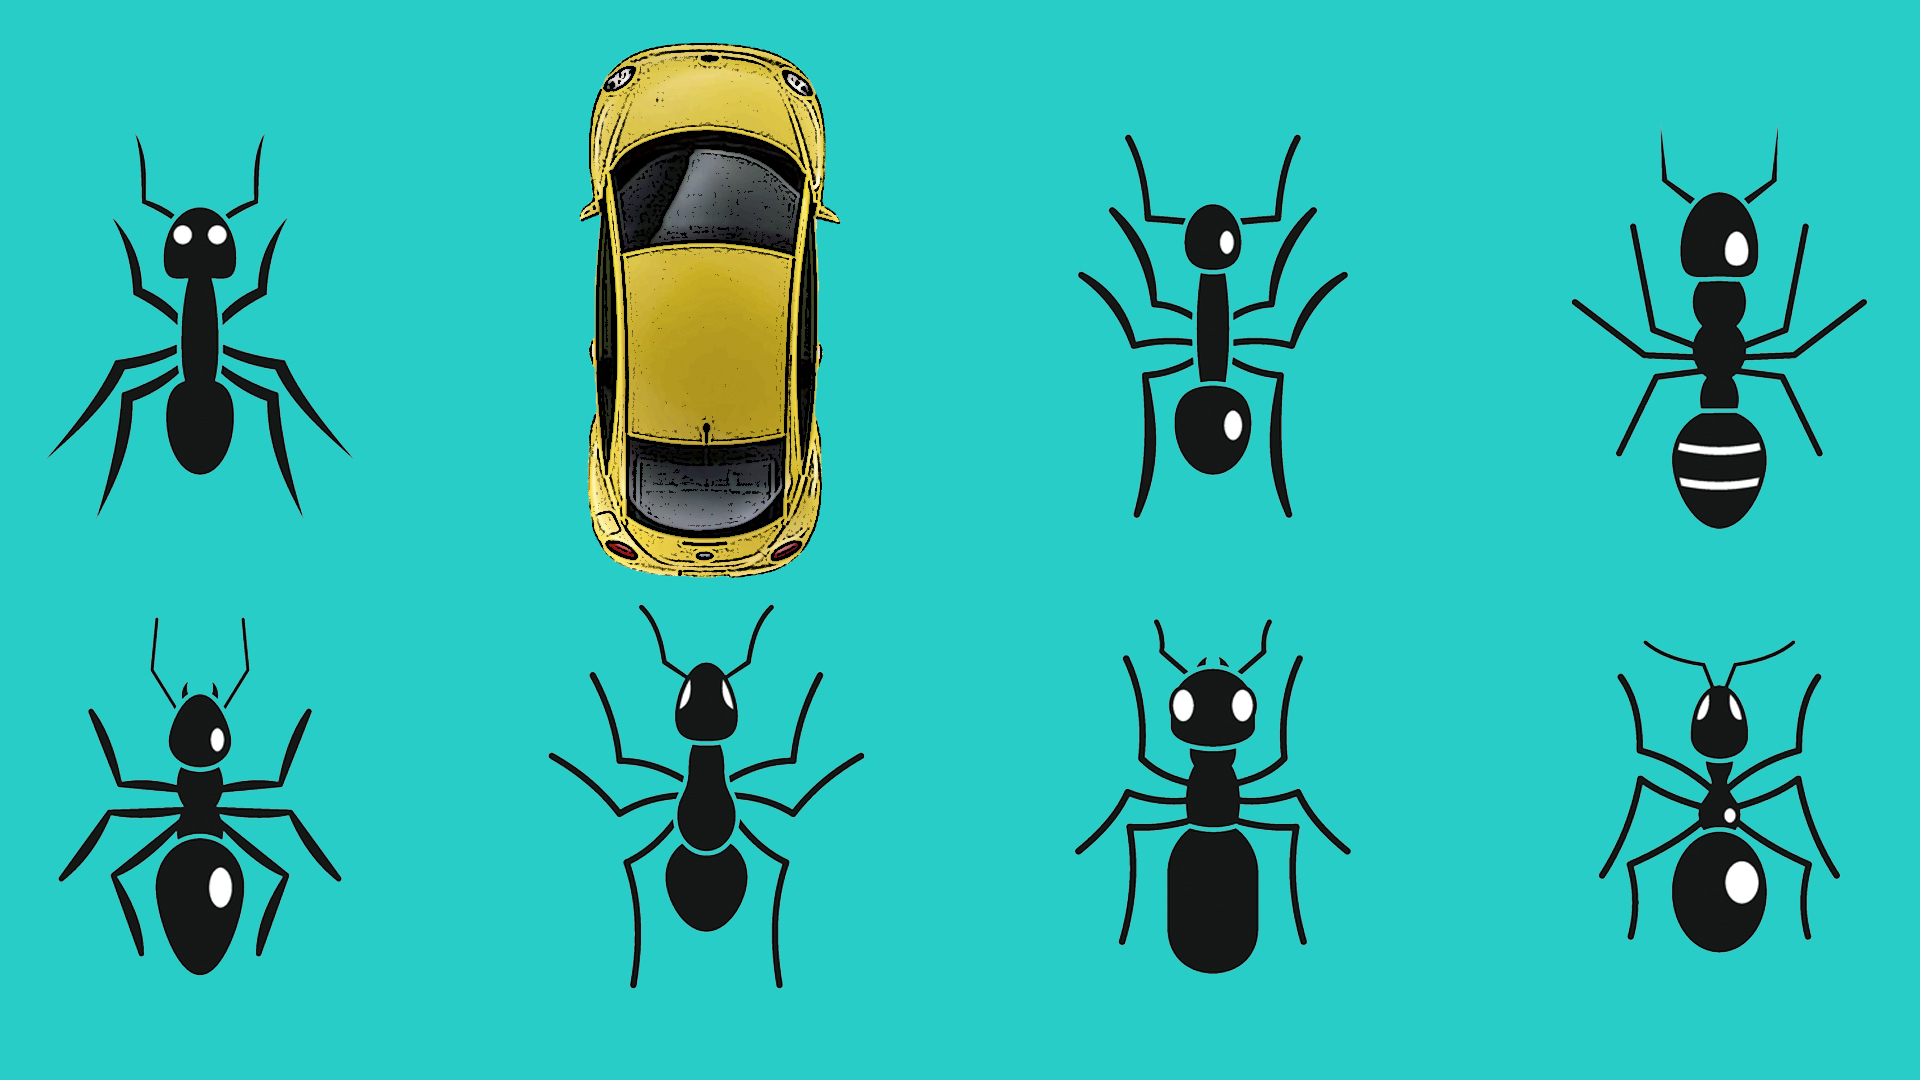 How to Remove Bugs From Your Car